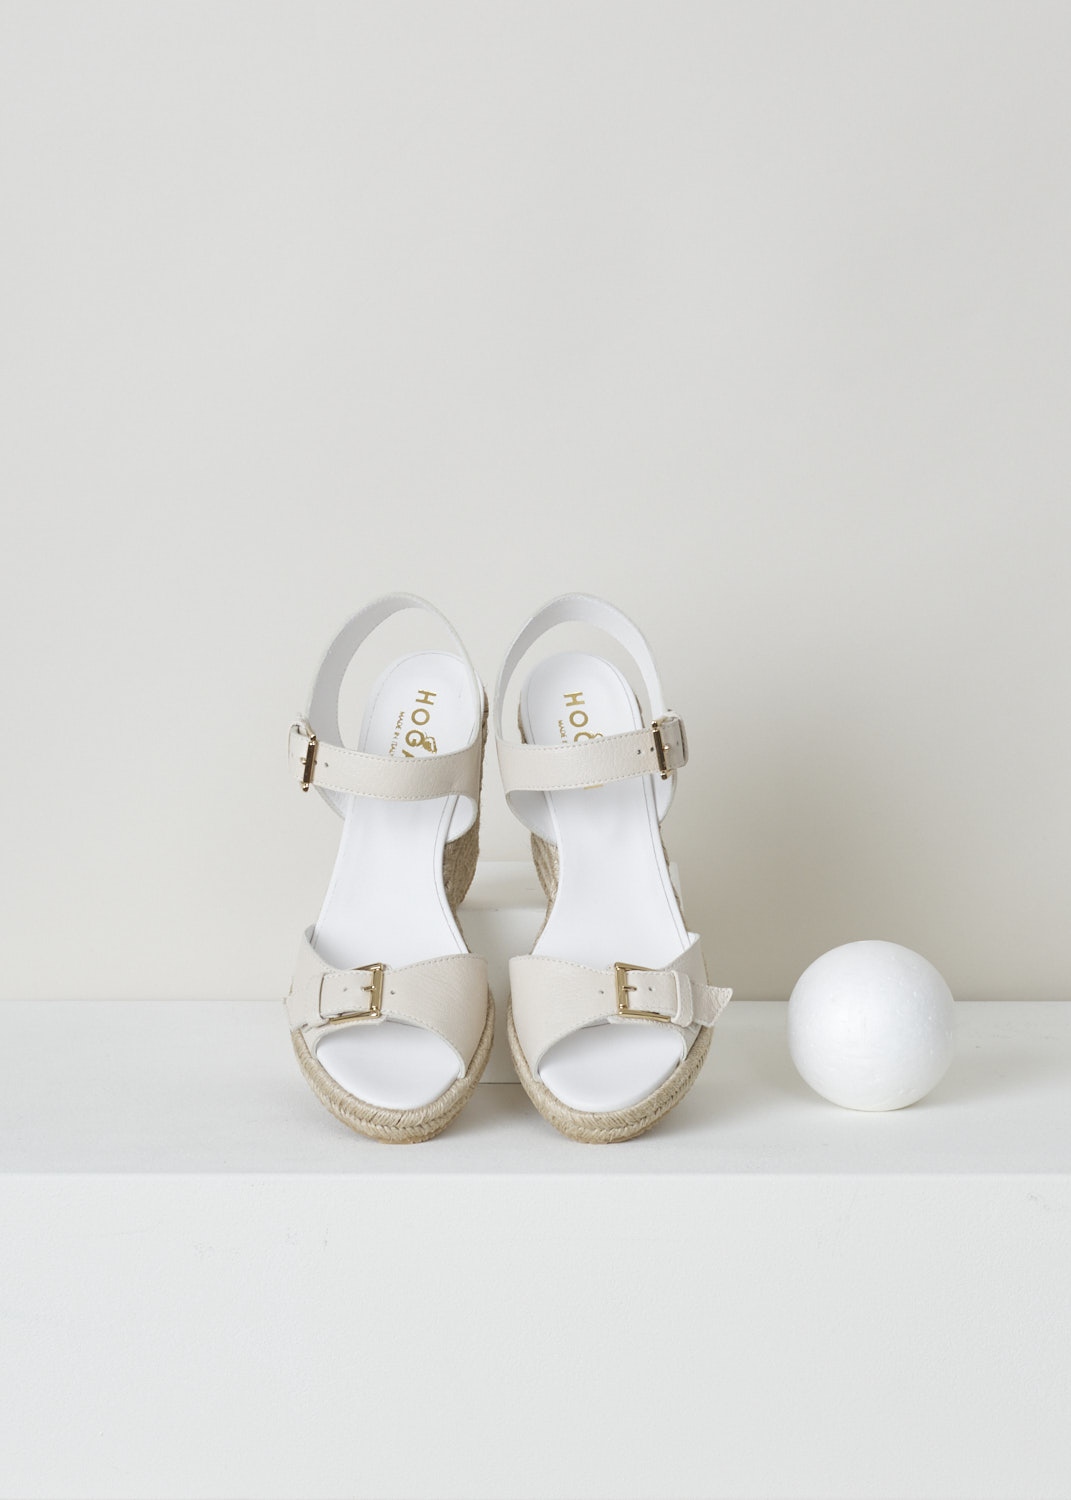 Hogan, Wedge heeled sandals in beige, HXW5580DL20P7KB018_H558_P7K, beige, top, These lovely cream coloured wedge heeled sandals fills us all with summer vibes. Featuring a single strap over the vamp with an gold-tone ornamental buckle. The ankle strap however, has a functional buckle which acts as your fastening option. 

Heel height: 11 cm / 4.3 inch. 